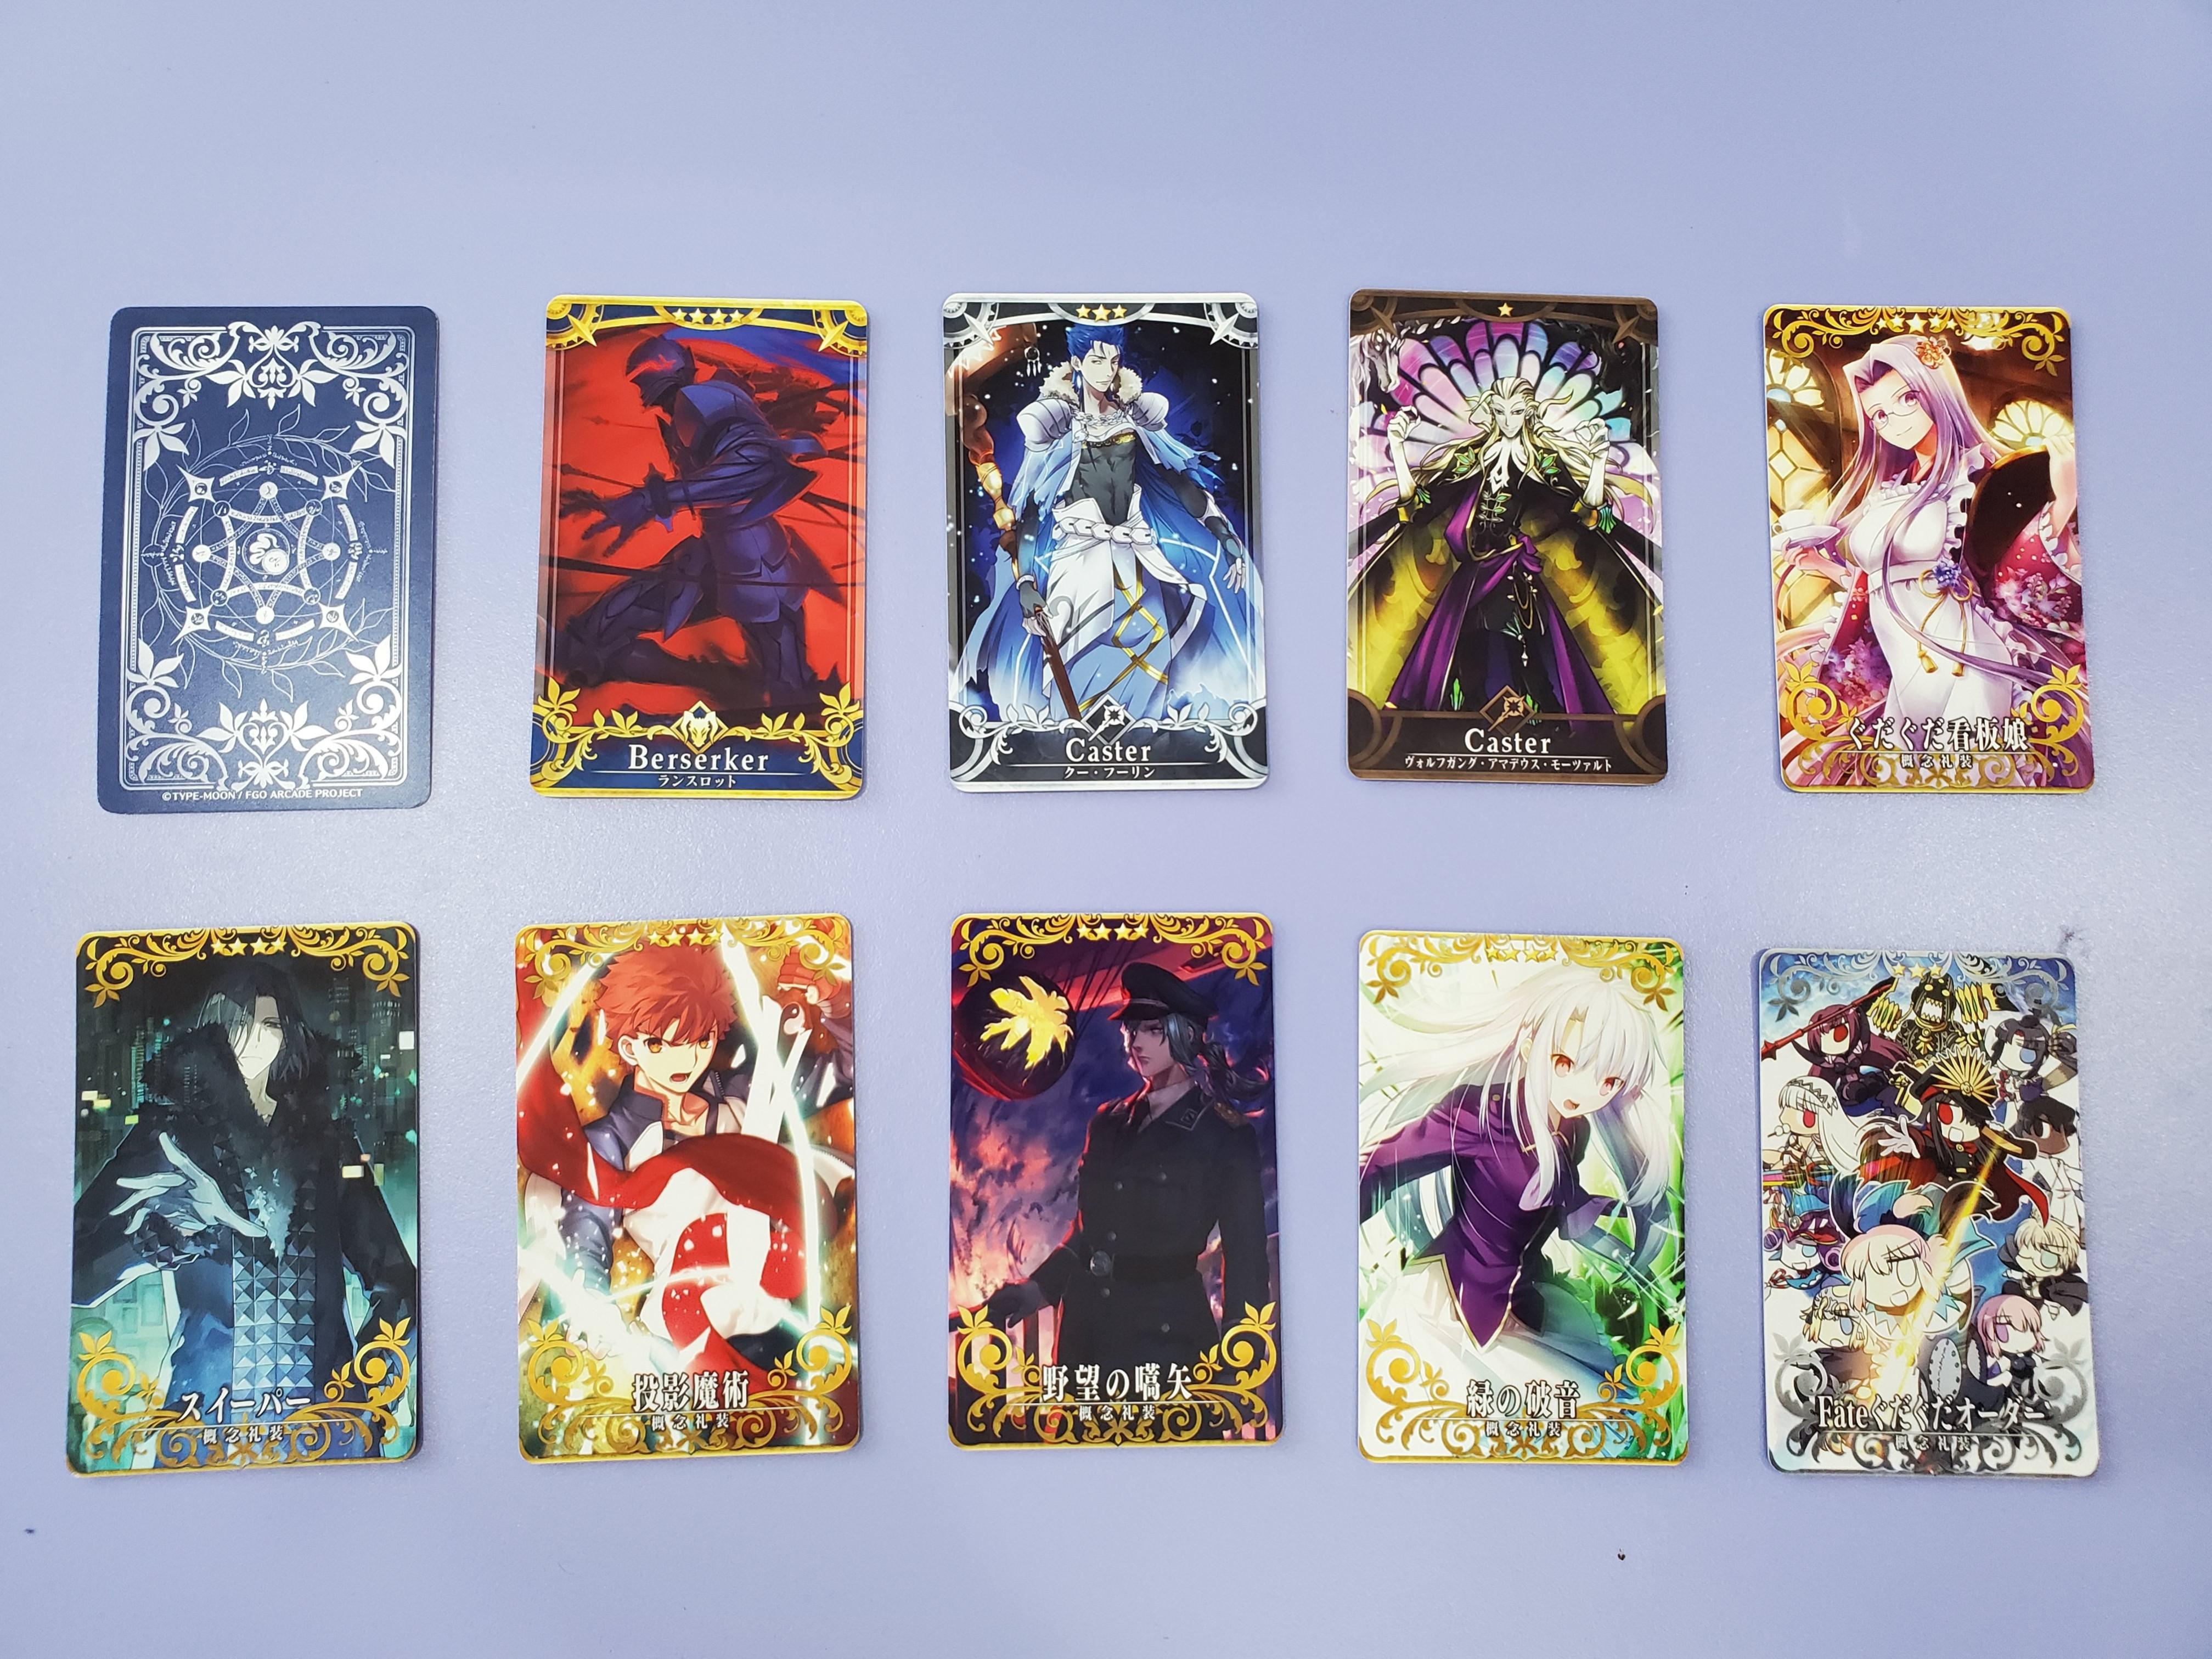 Fate Grand Order Fgo Arcade Card Set 7 Hobbies And Toys Collectibles And Memorabilia Fan